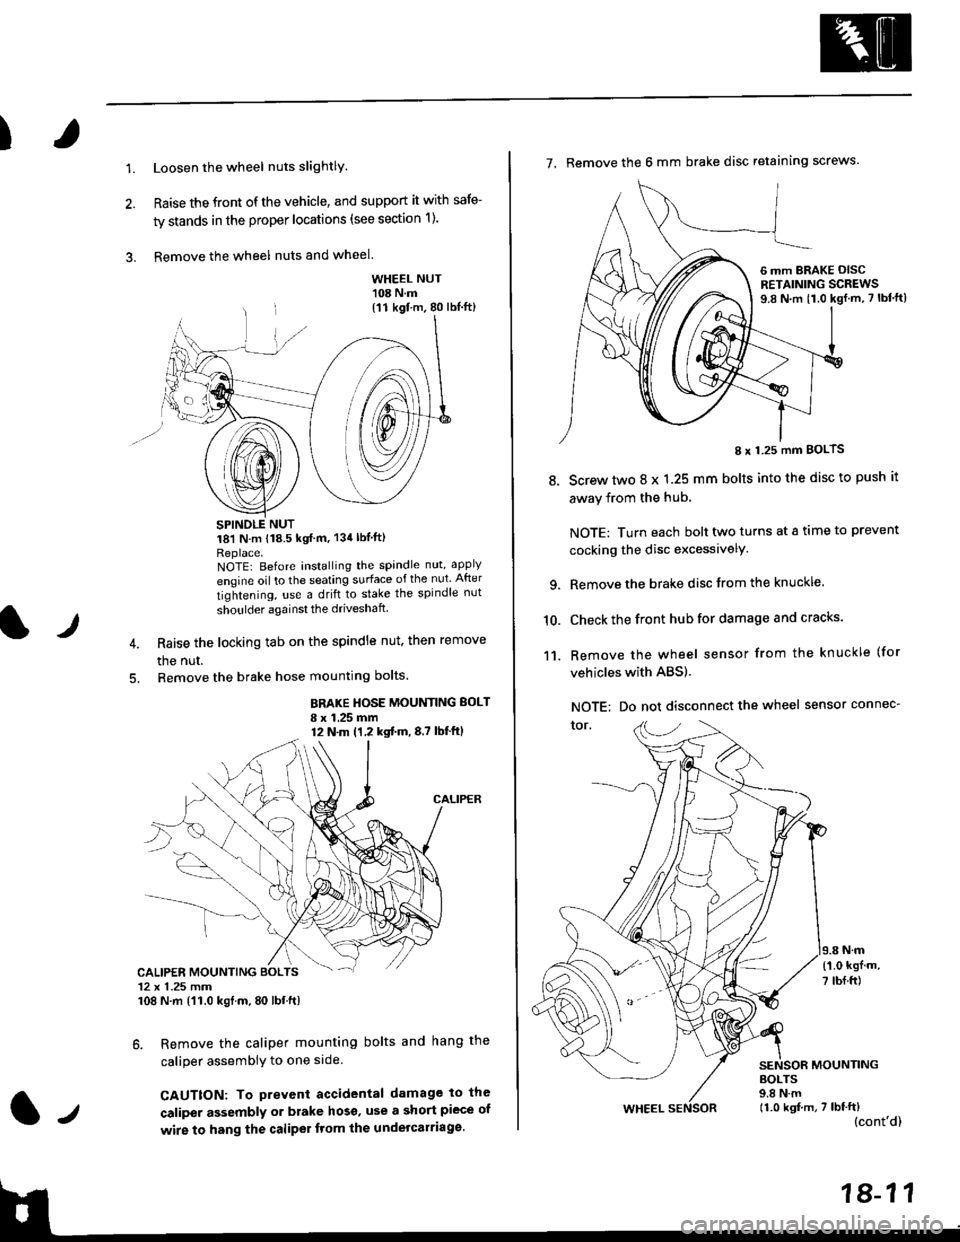 HONDA CIVIC 2000 6.G Workshop Manual )
1.Loosen the wheel nuts slightlY.
Raise the front of the vehicle, and support it with safe-
ty stands in the proper locations (see section 1).
Remove the wheel nuts and wheel.3.
l)
WHEEL NUT108 N.m